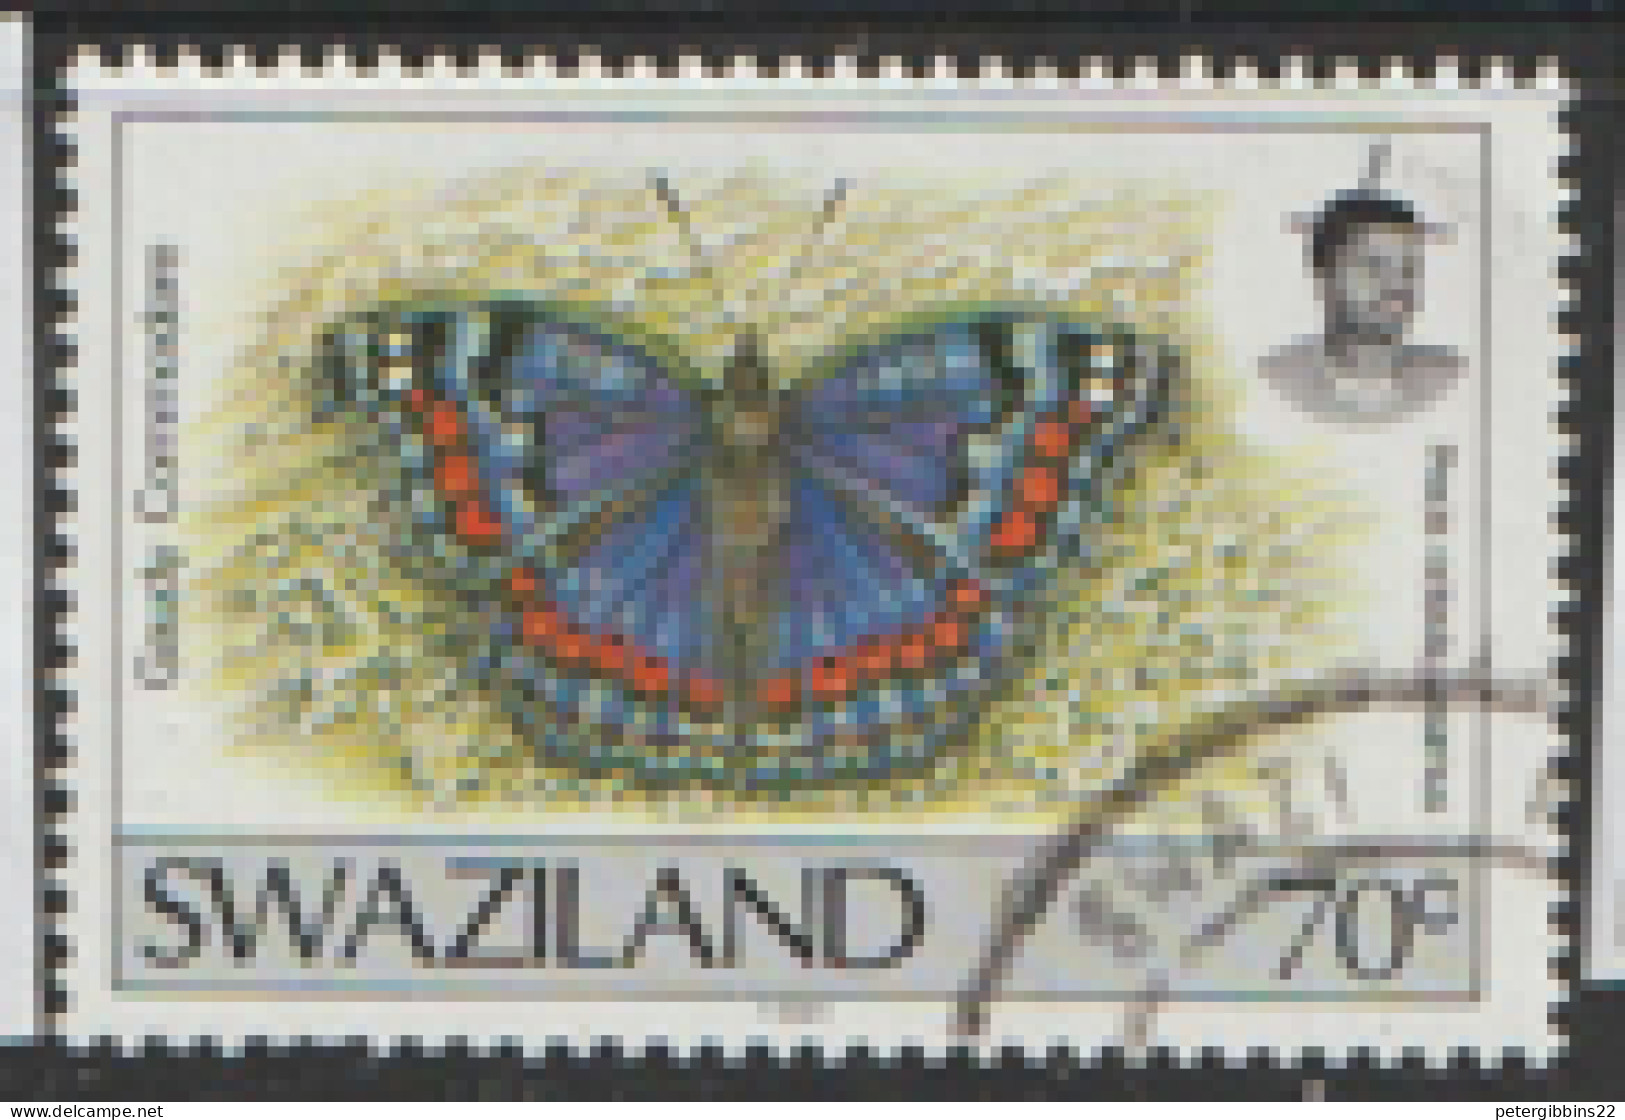 Swaziland  1992  SG  616  70c  Butterfly Fine Used - Swaziland (...-1967)